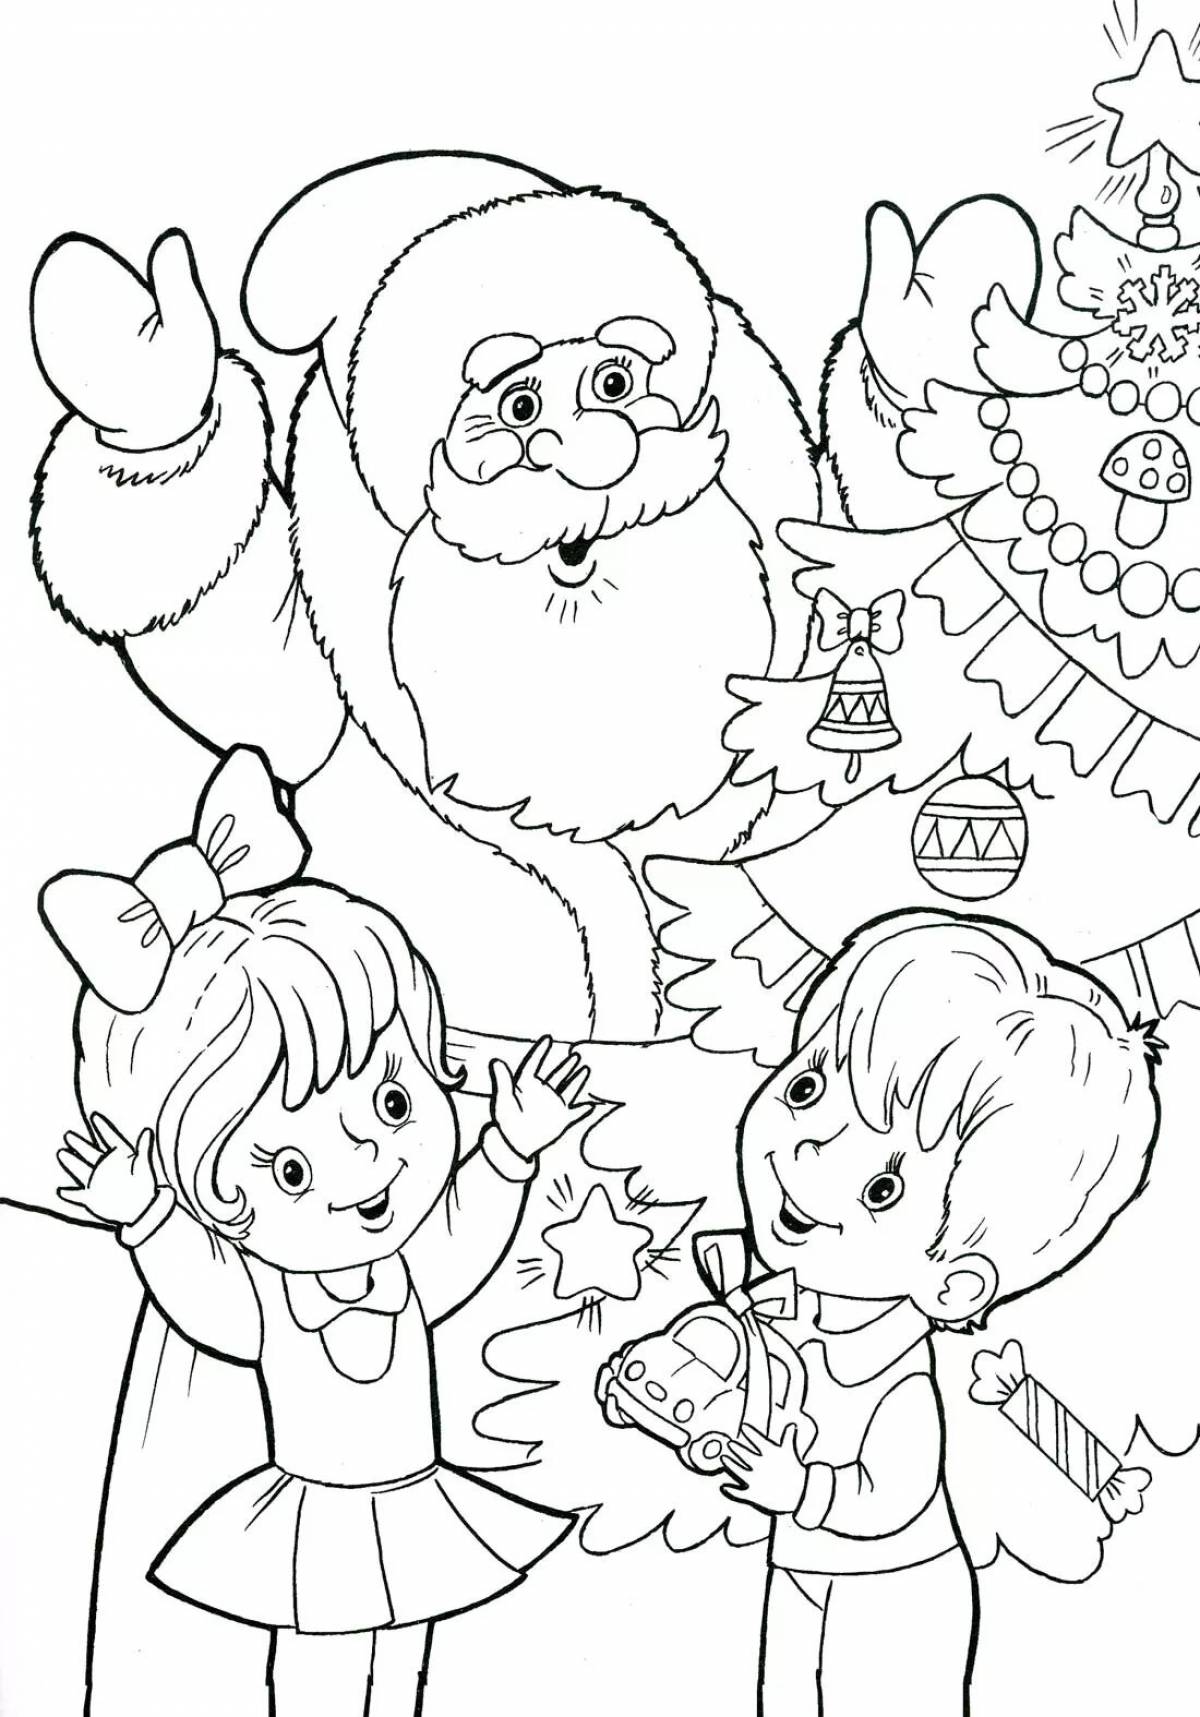 Exotic Christmas coloring book